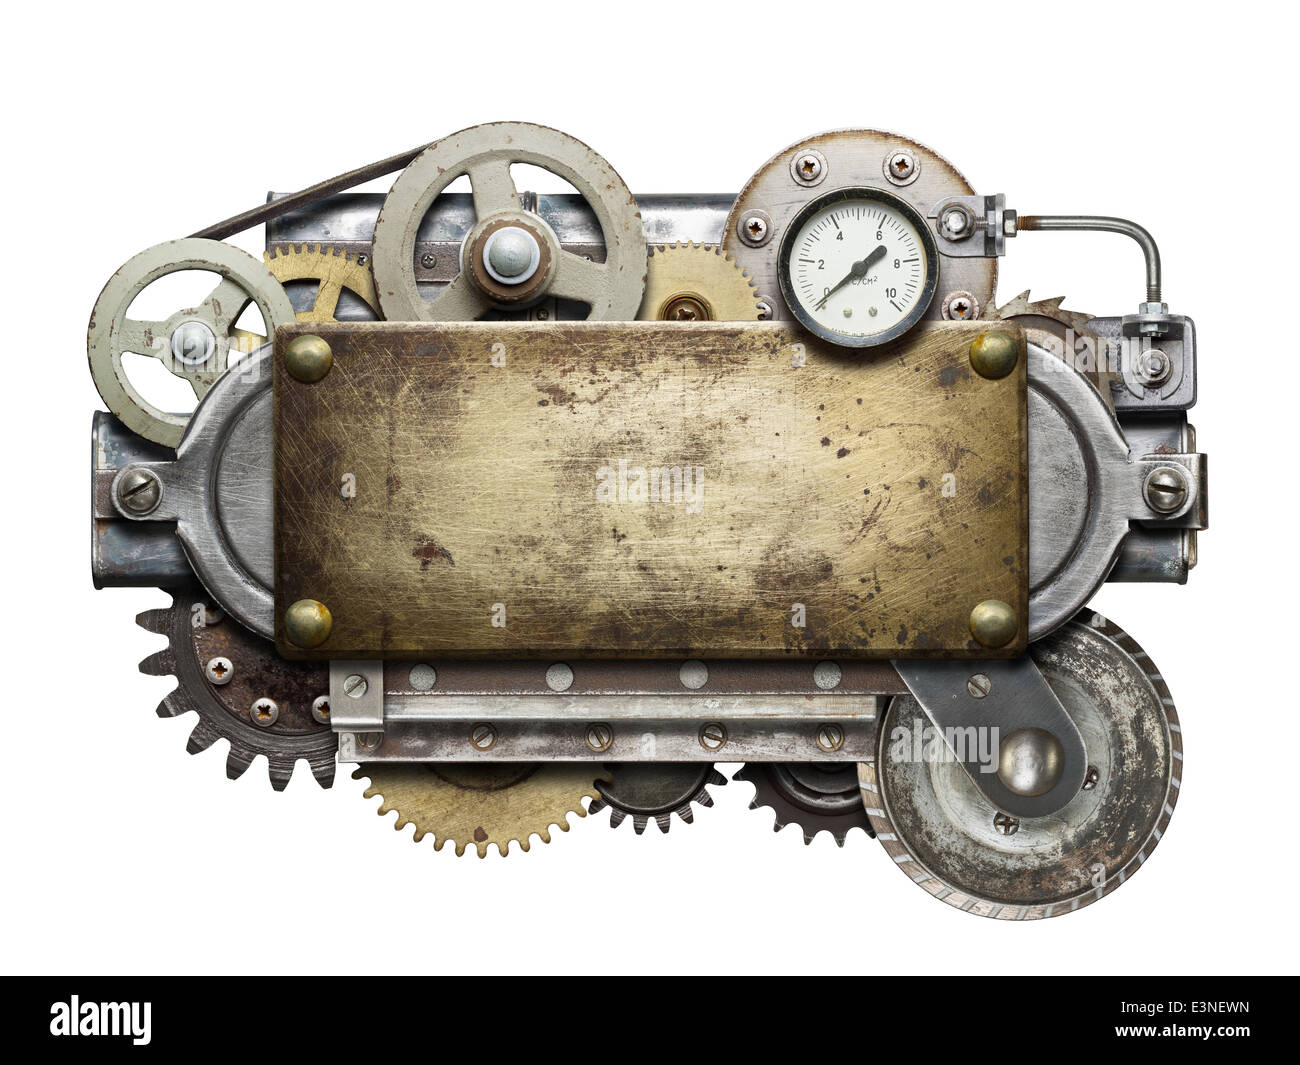 Stylized metal collage of mechanical device. Stock Photo